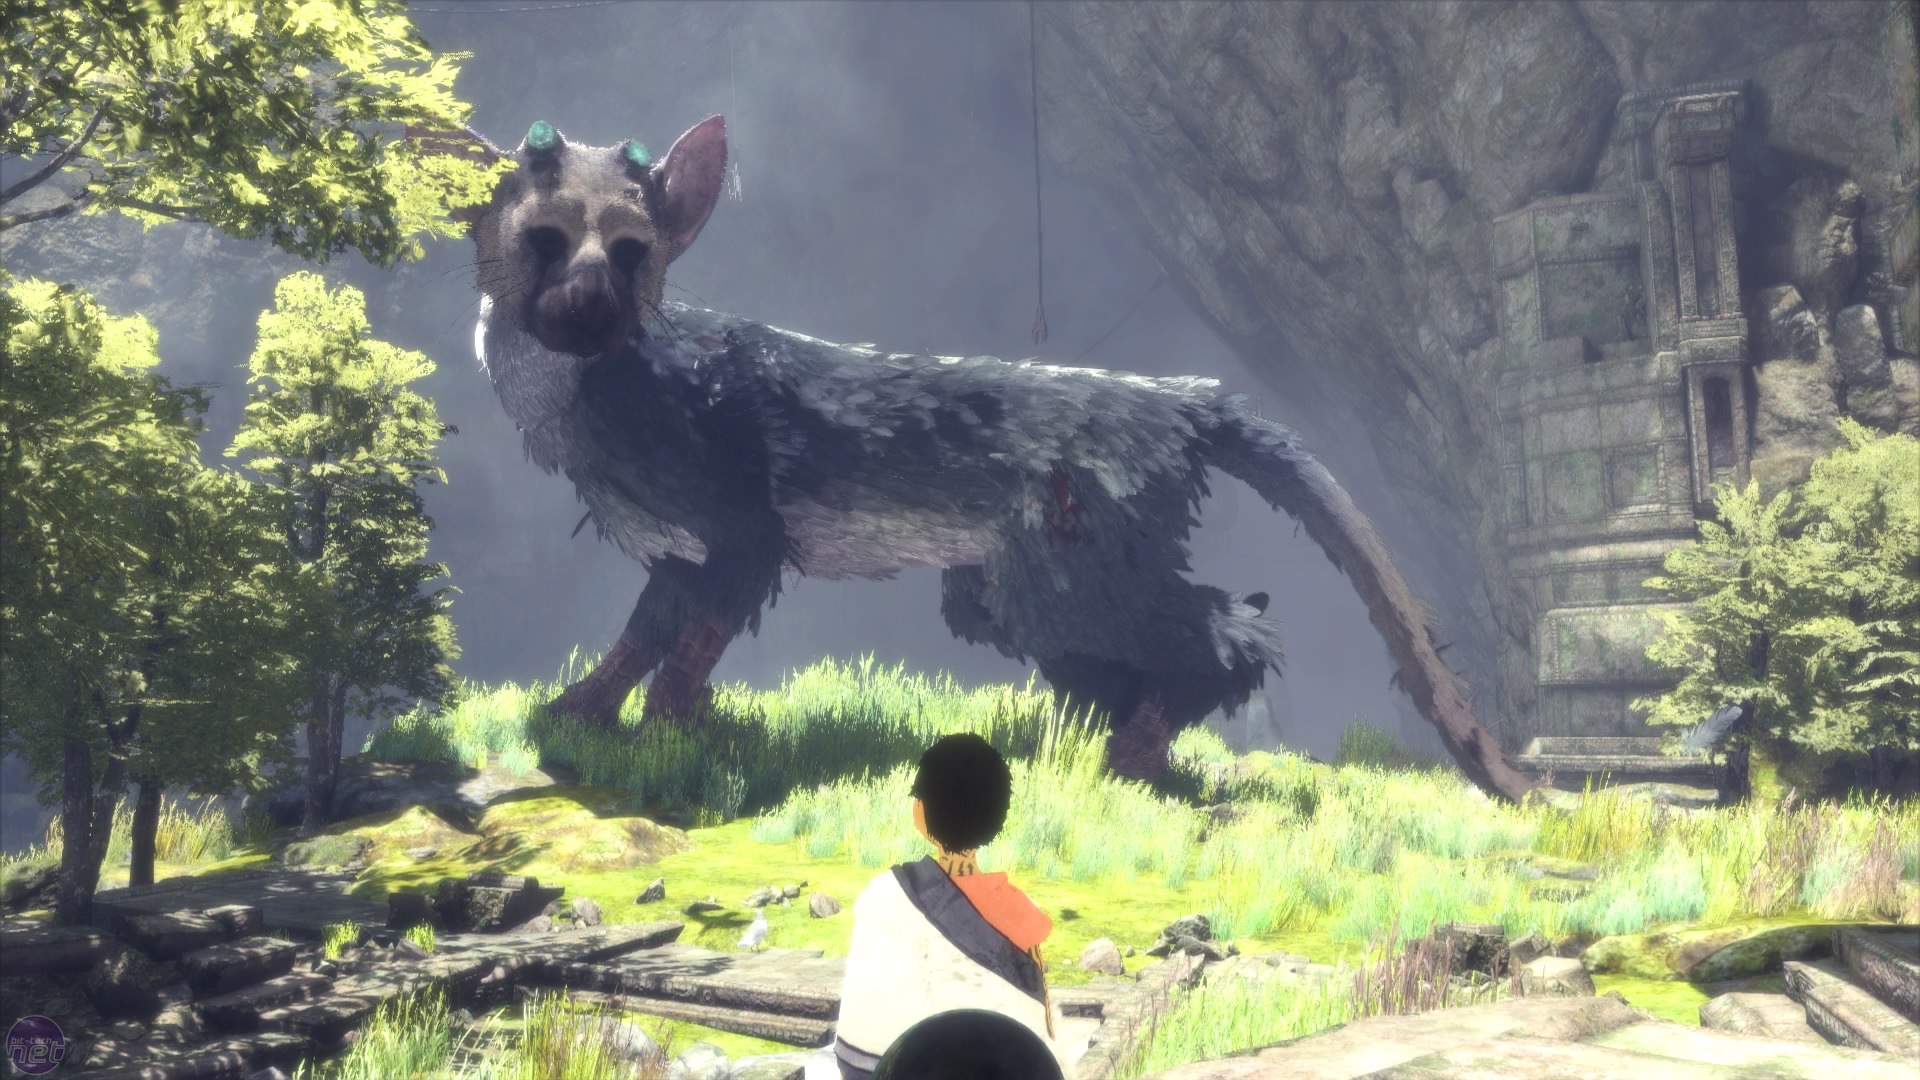 Guardian ps4. Трико ласт Гардиан. Игра the last Guardian. Трику the last Guardian. Трико зверь the last Guardian.